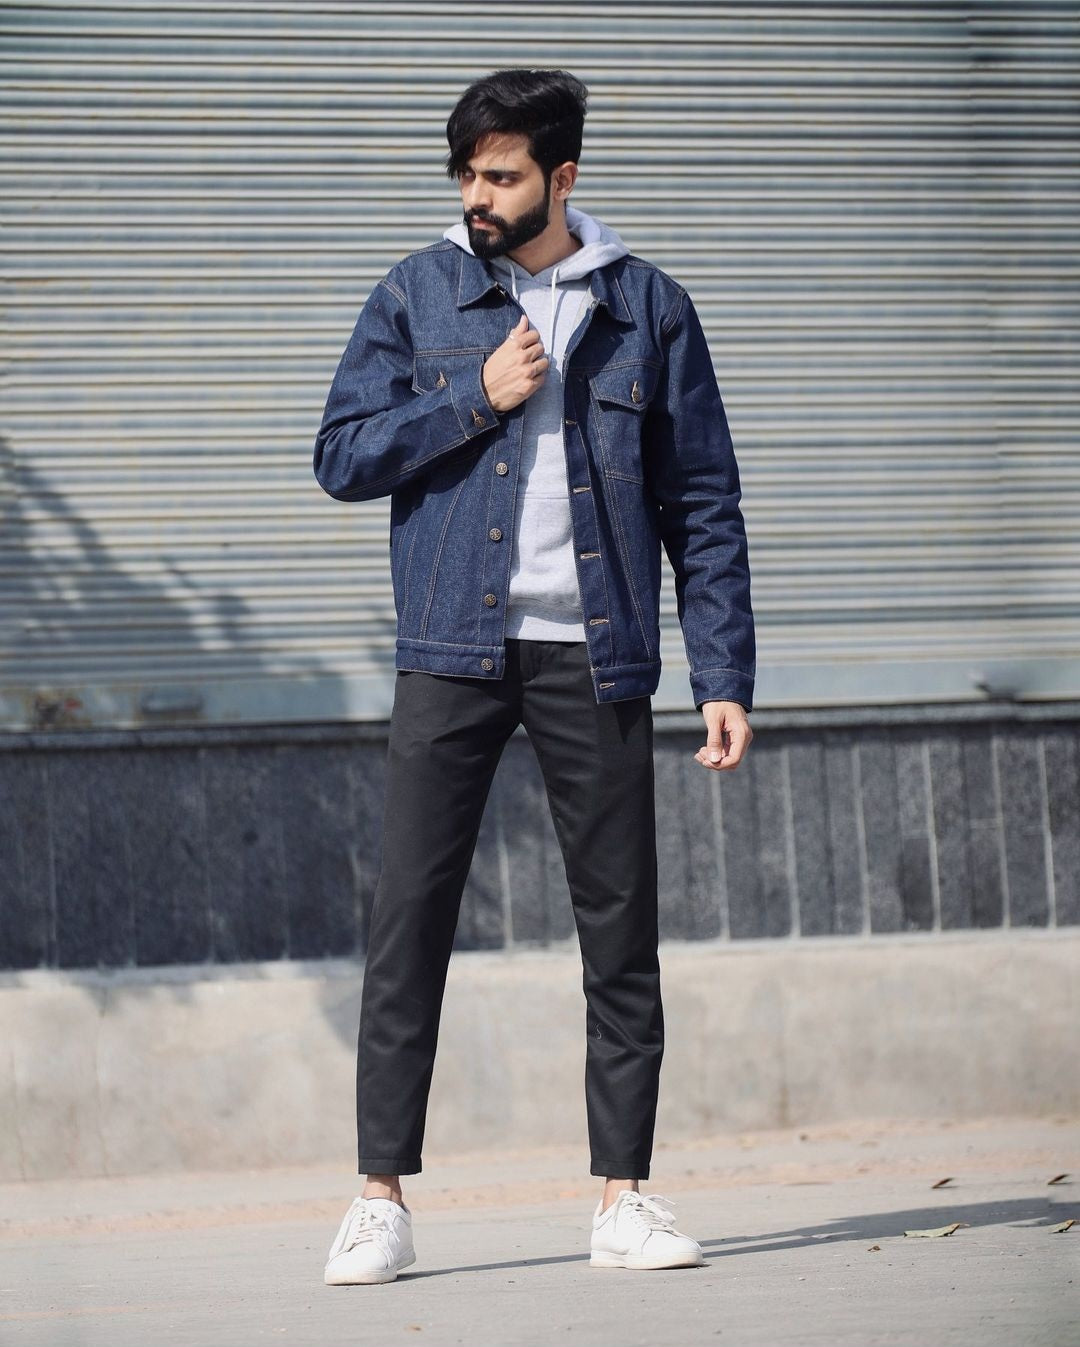 How to Wear the Oversize Denim Jacket Trend | Who What Wear